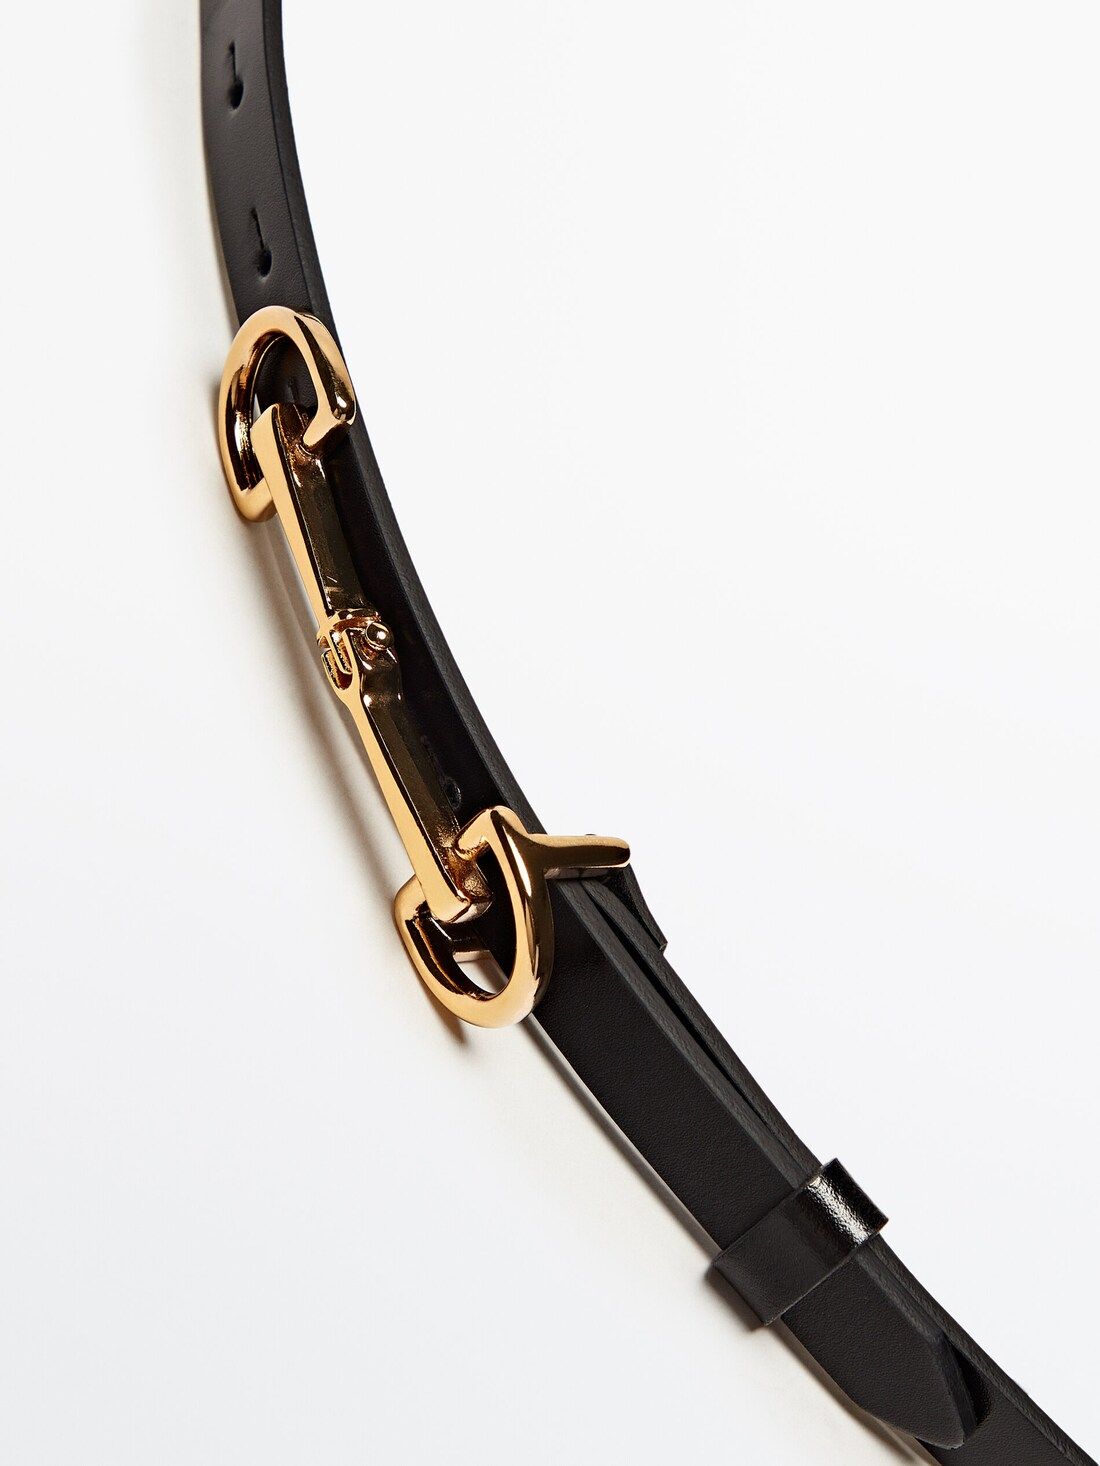 Leather belt with double long buckle | Massimo Dutti UK